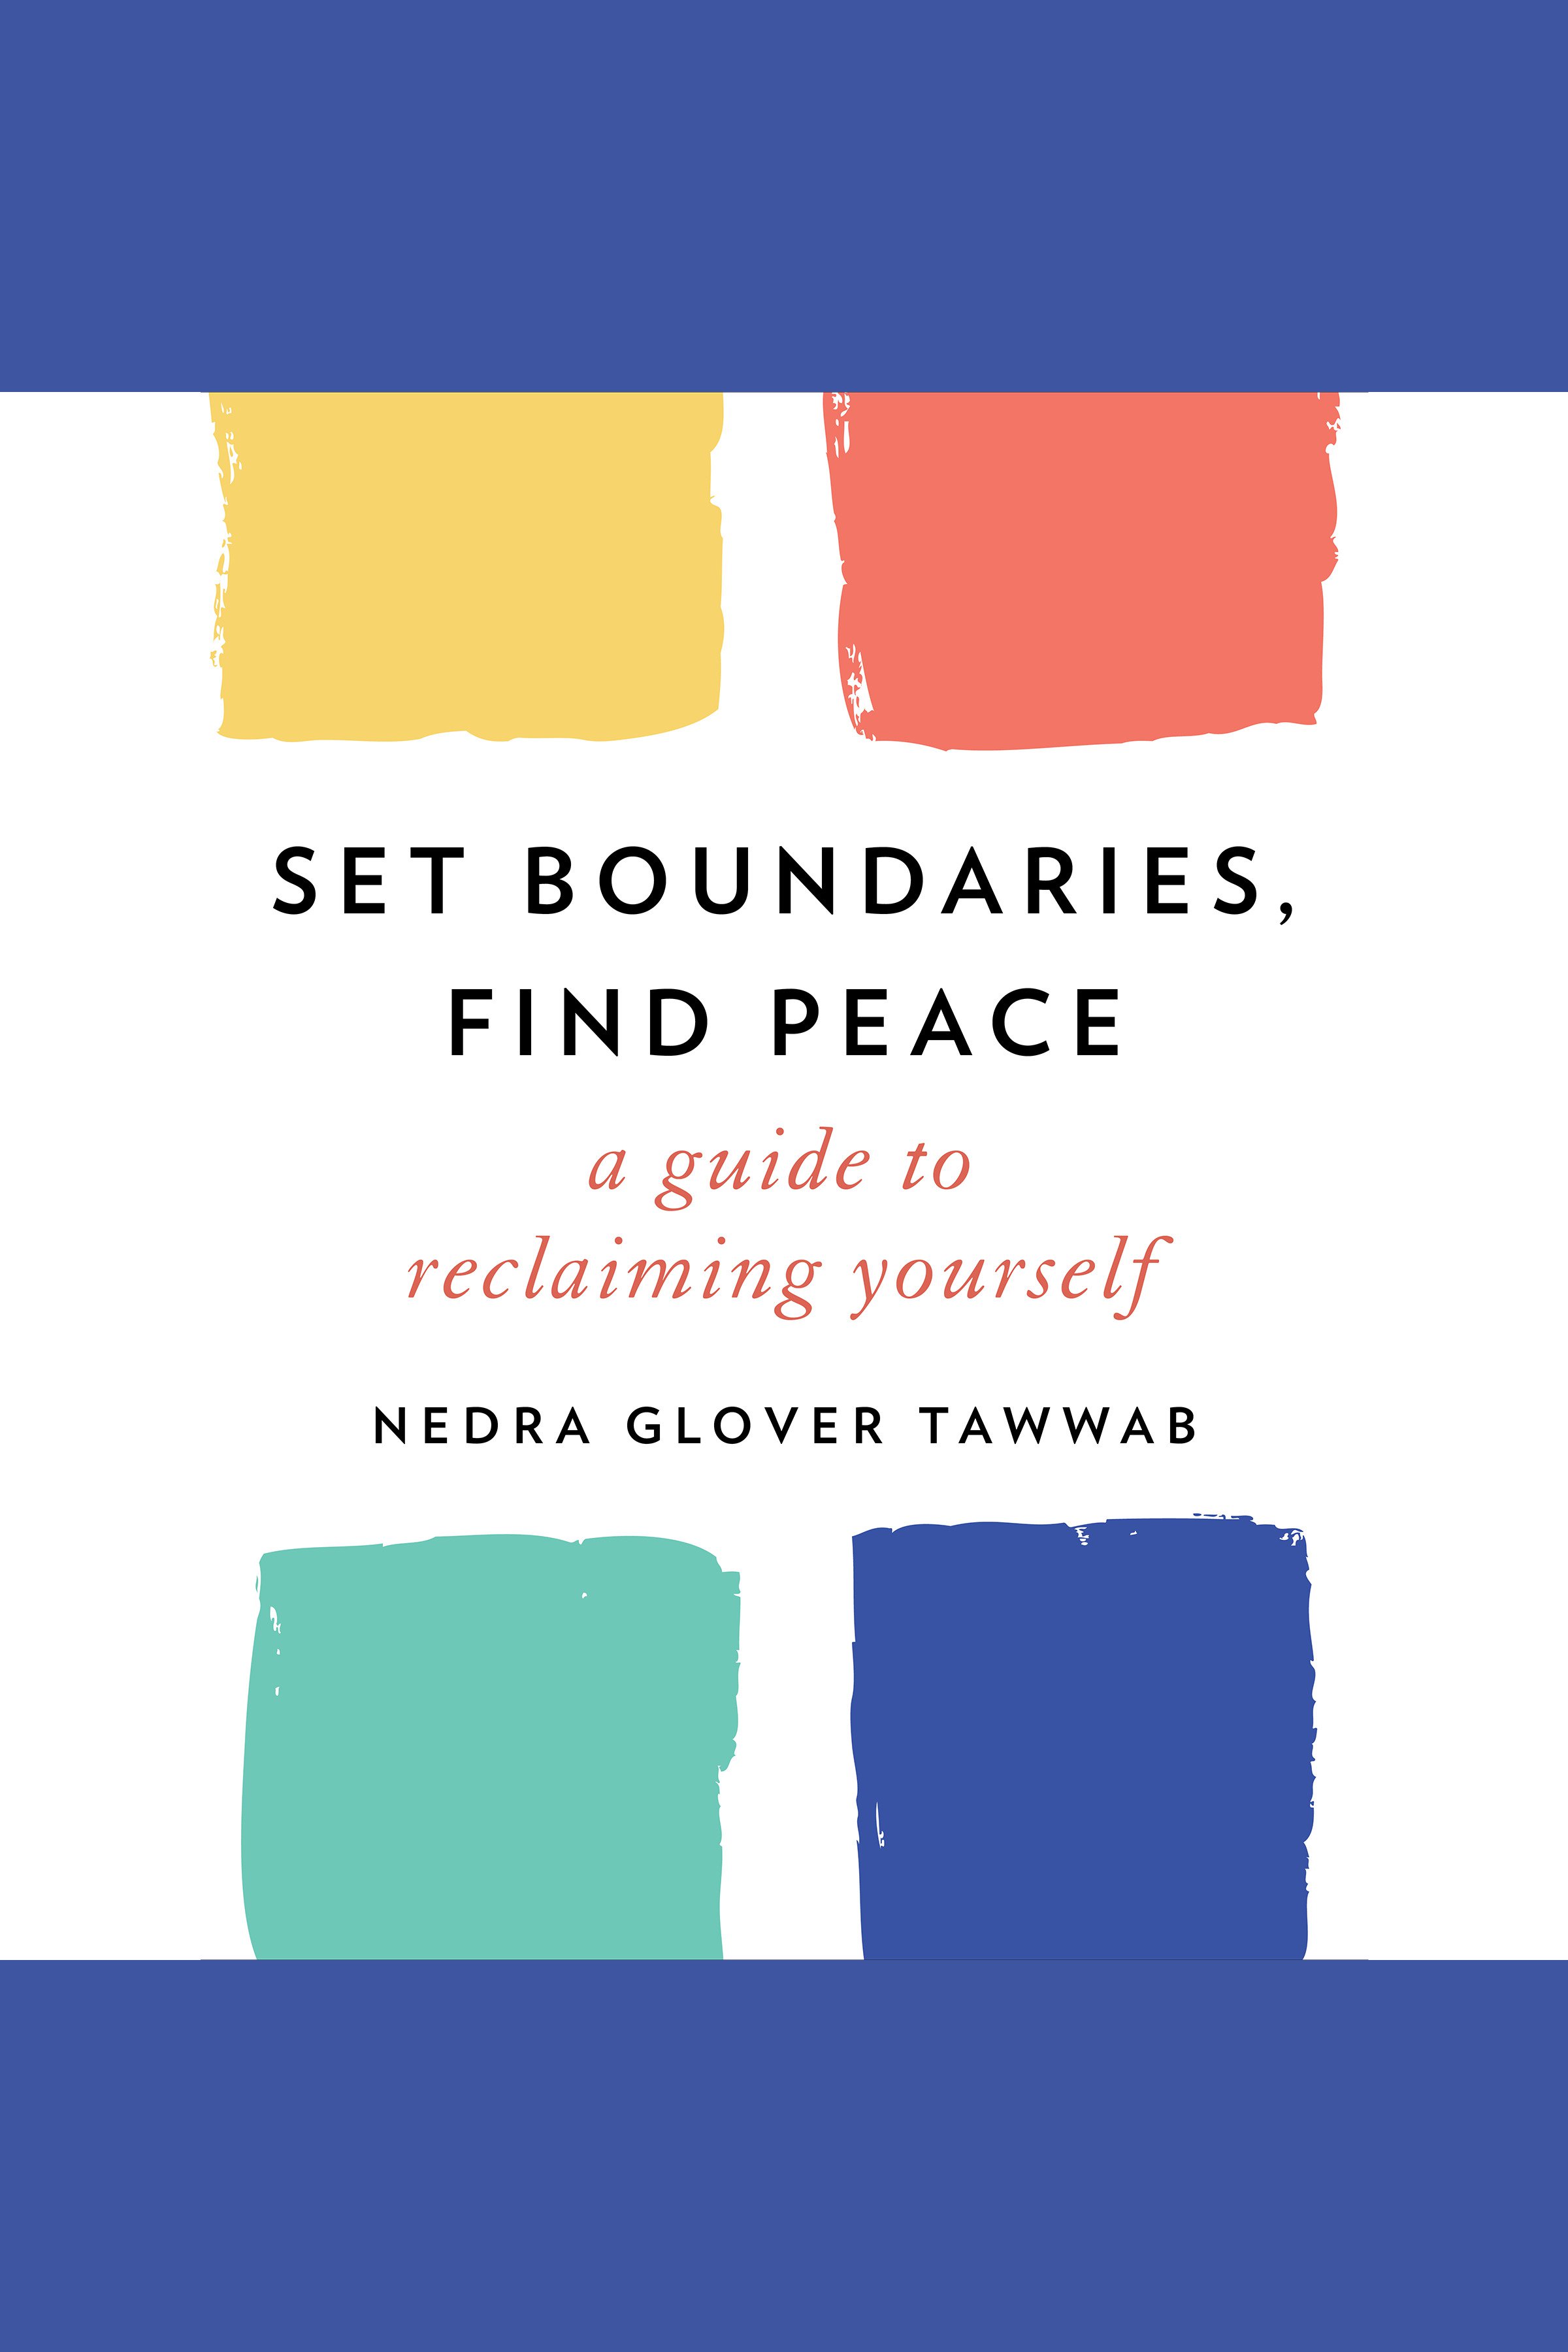 Set boundaries, find peace : a guide to reclaiming yourself